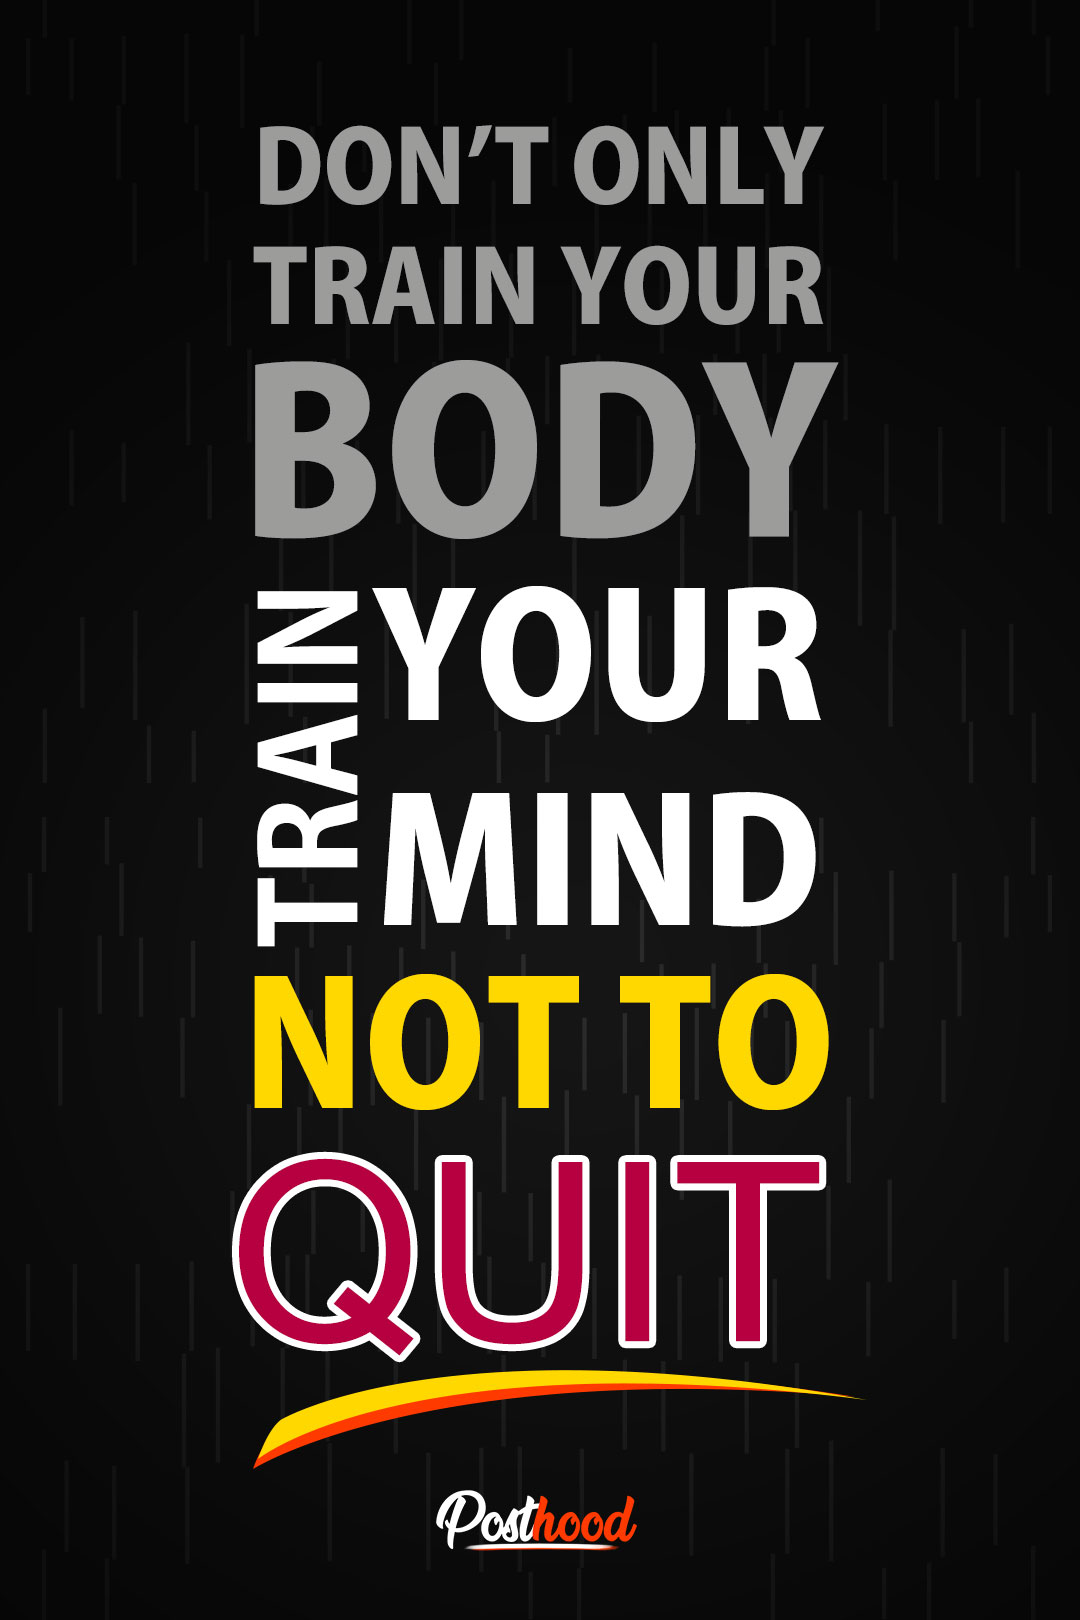 Don’t only train your body, train your mind not to Quit. Inspiring Quotes to motivate you to keep going. Morning Workout motivation.